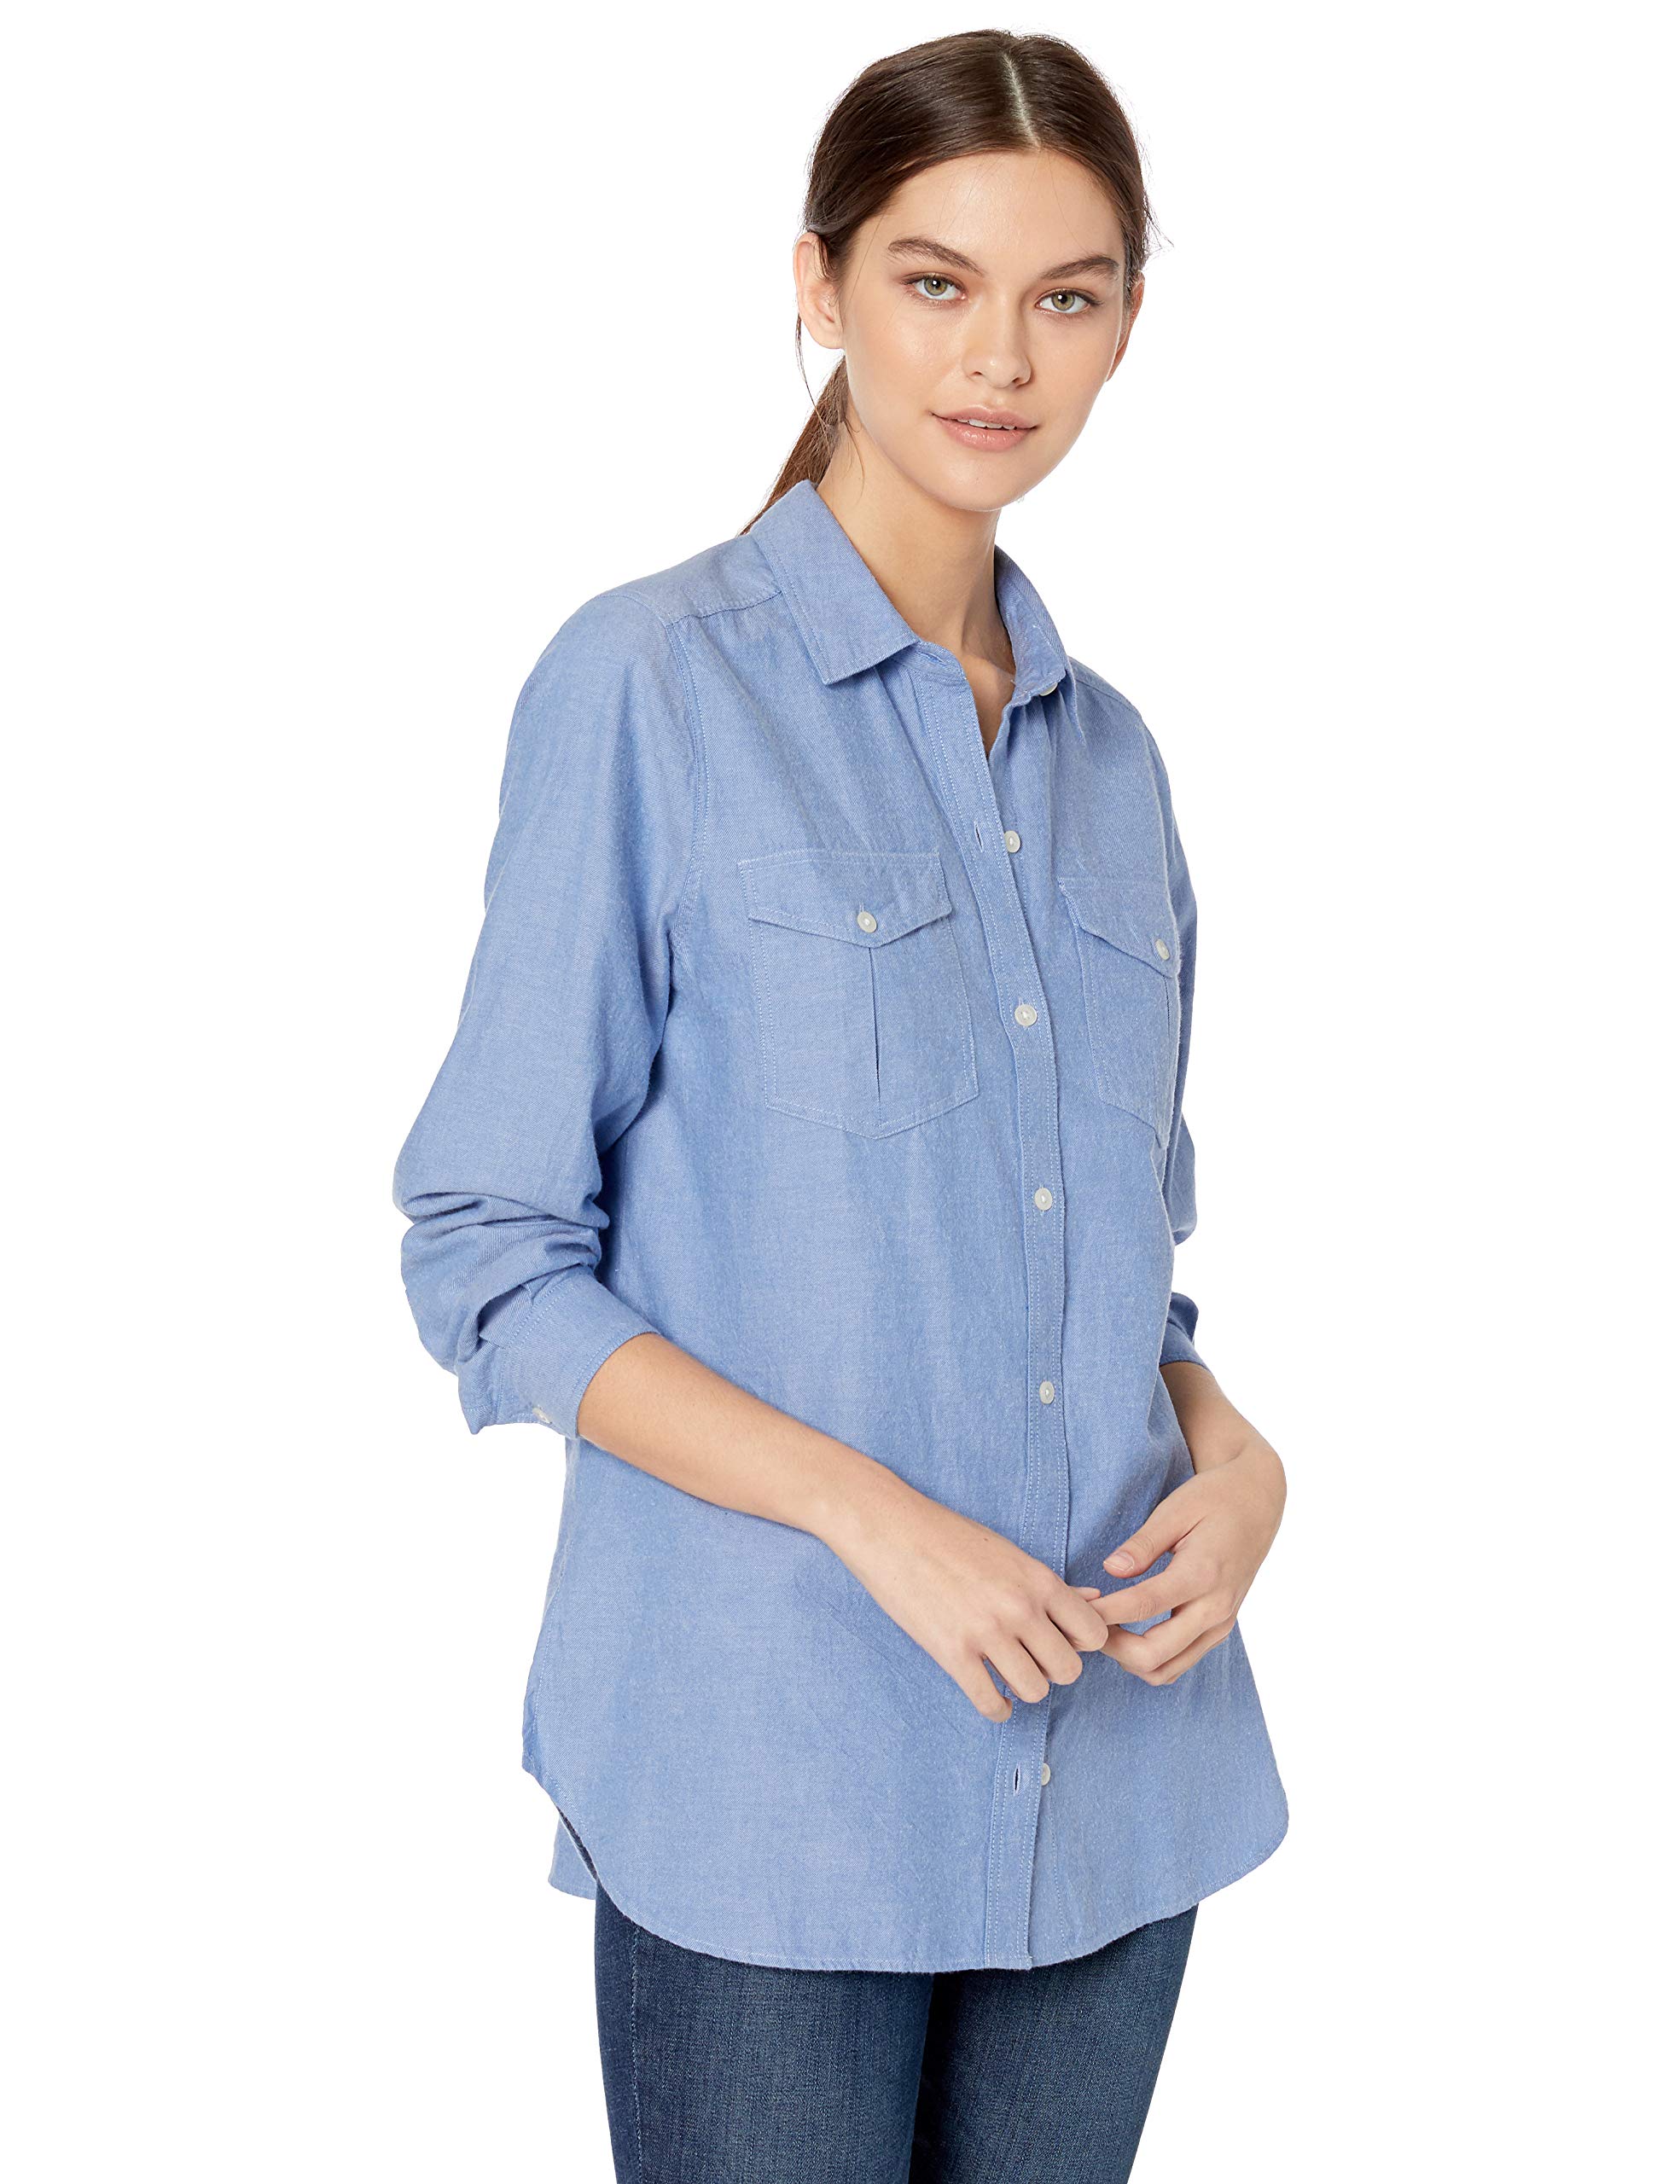 Book Cover Amazon Brand - Goodthreads Women's Brushed Twill Long-Sleeve Utility Shirt